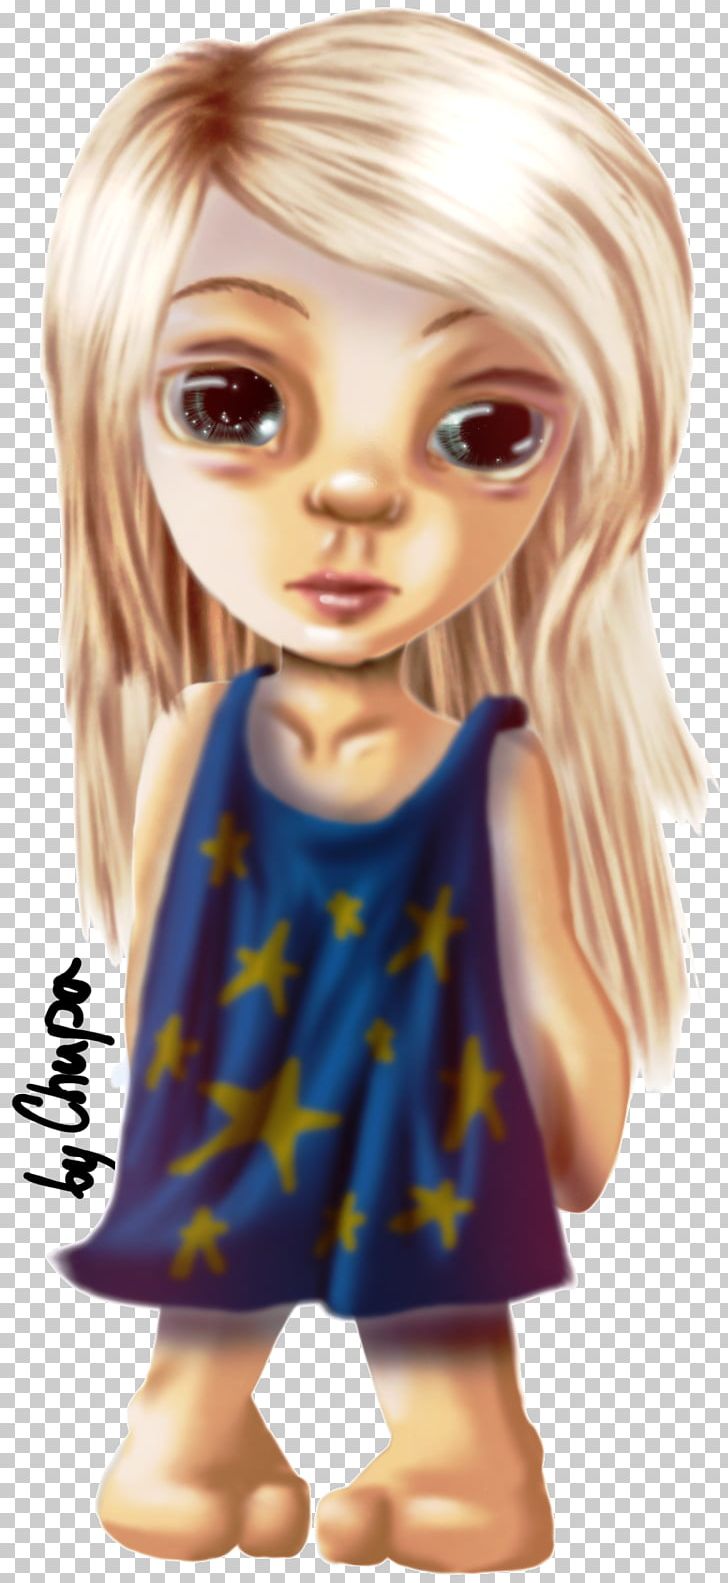 Blond Brown Hair Doll Character PNG, Clipart, Agony, Animated Cartoon, Blond, Brown, Brown Hair Free PNG Download